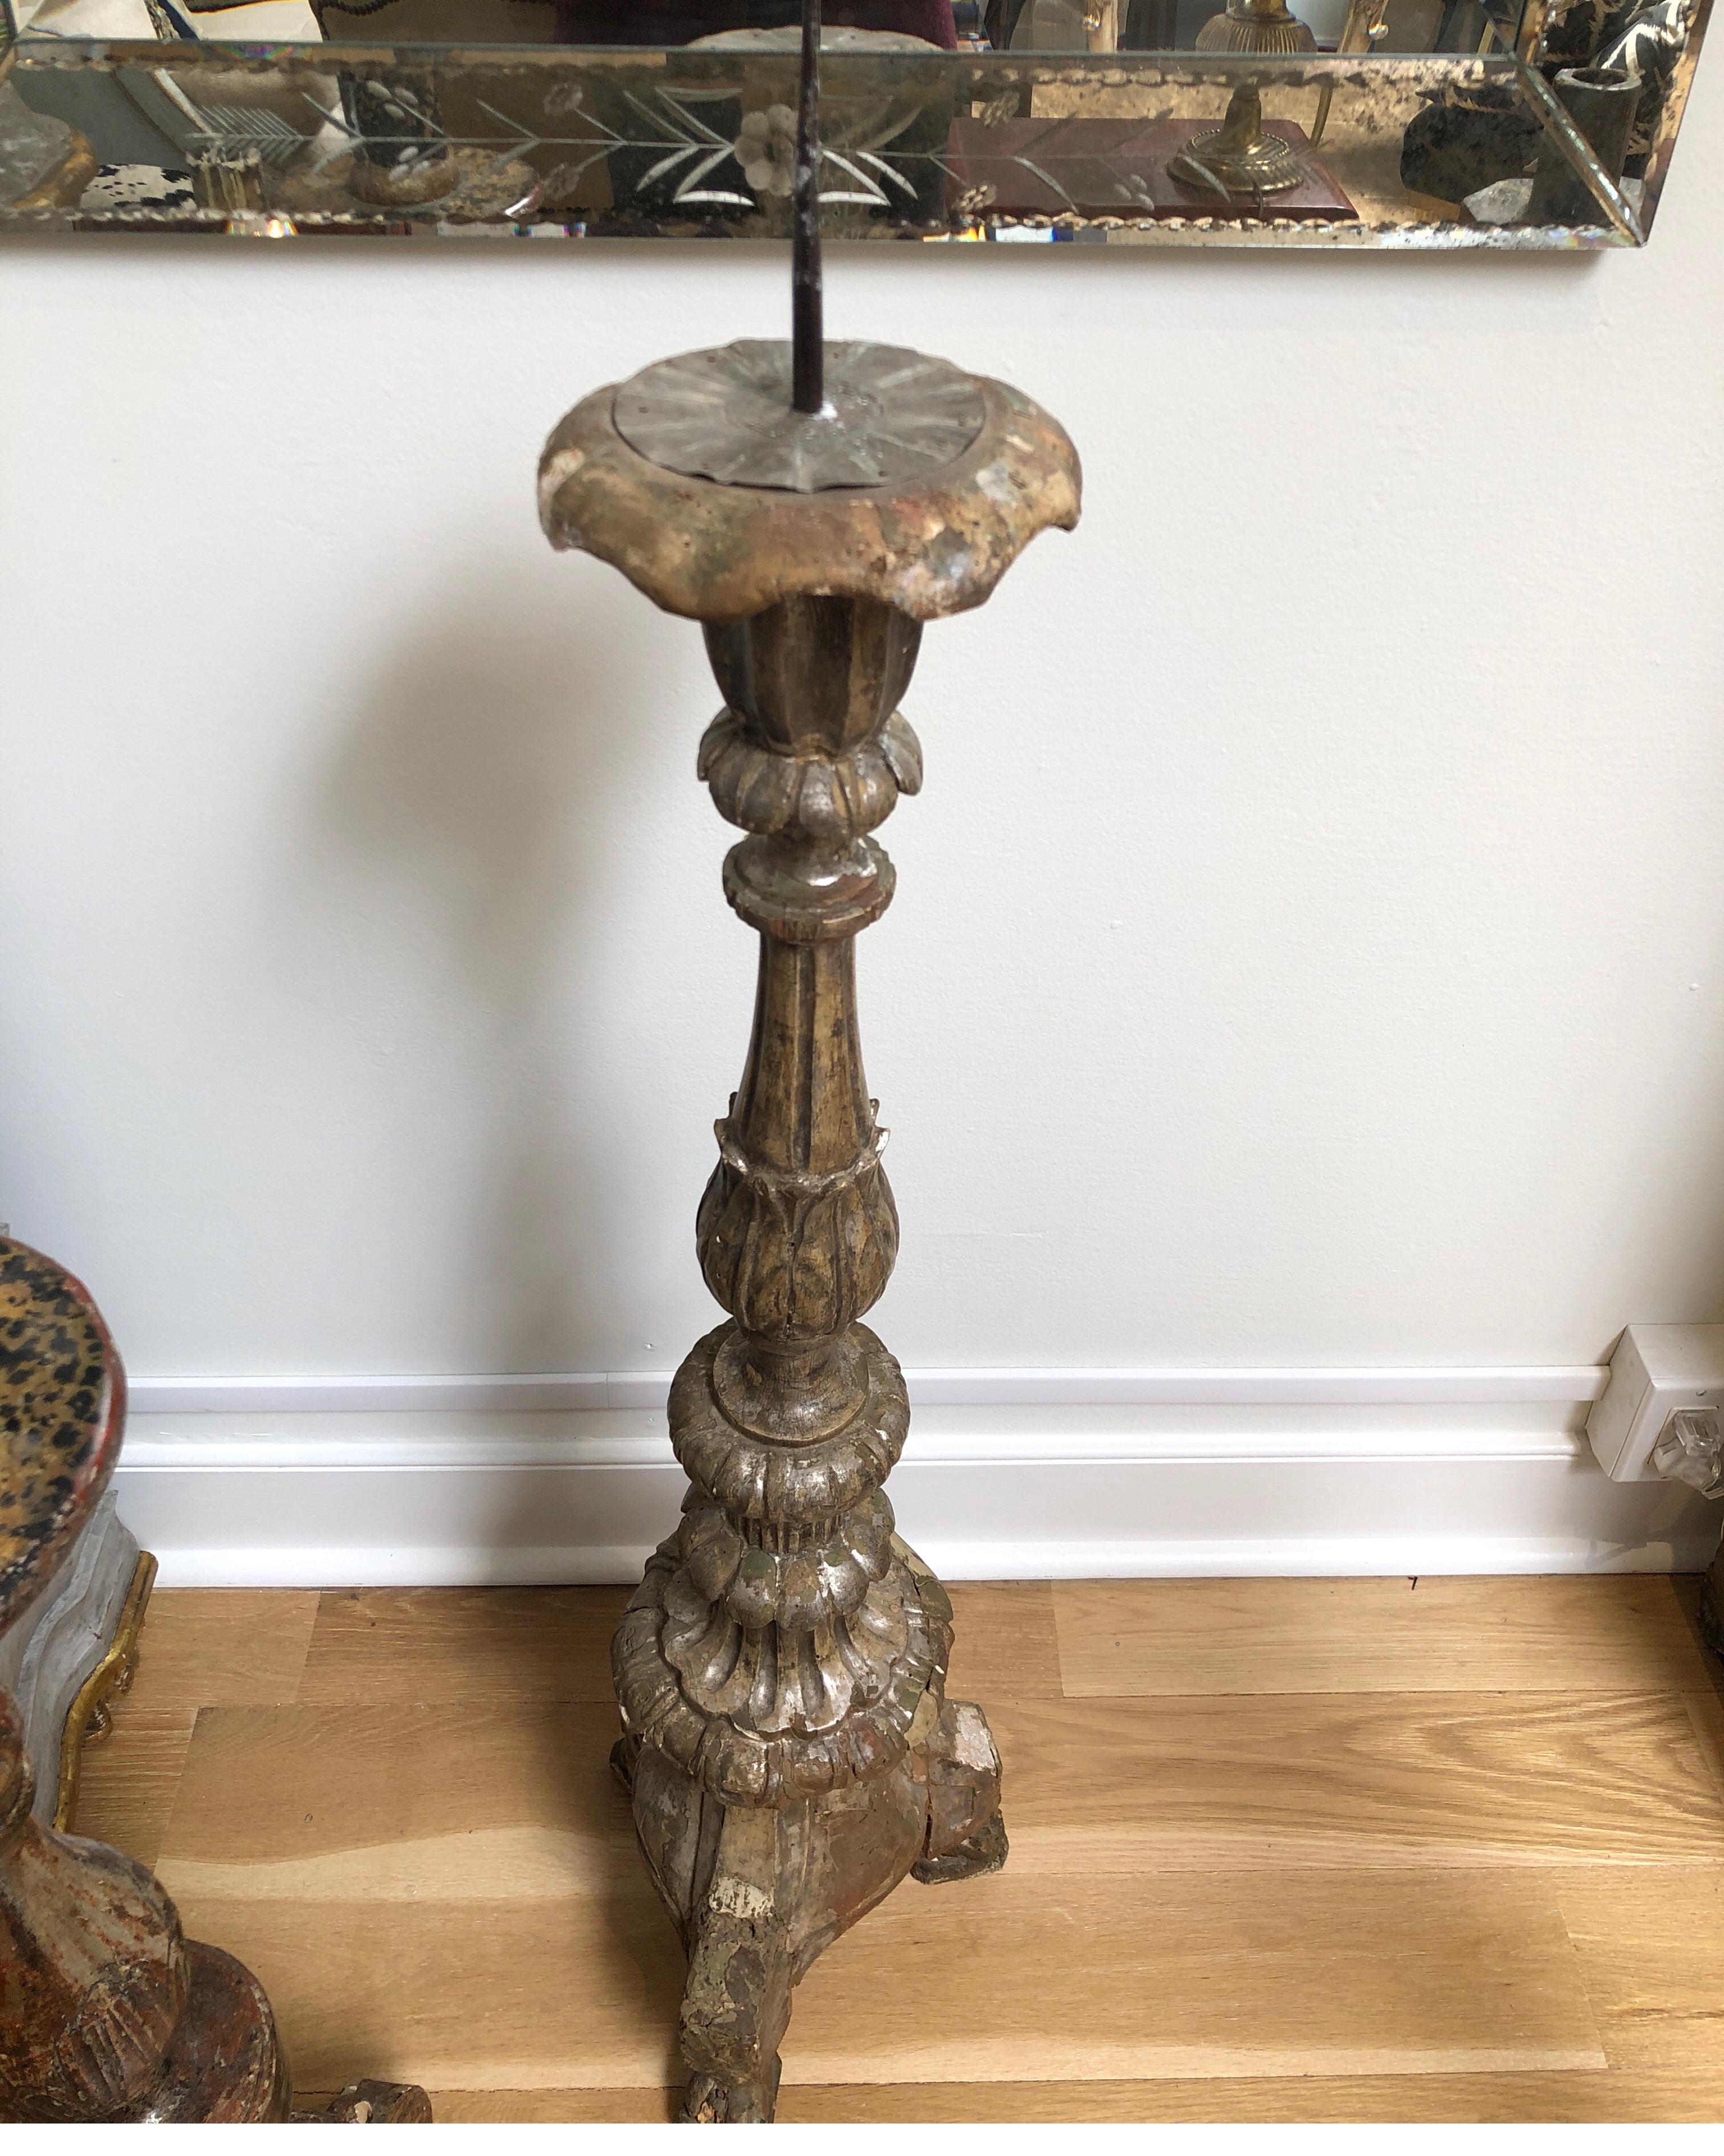 Grand Antique 18th Century French Alter Candlesticks or Candelabra Prickets 1